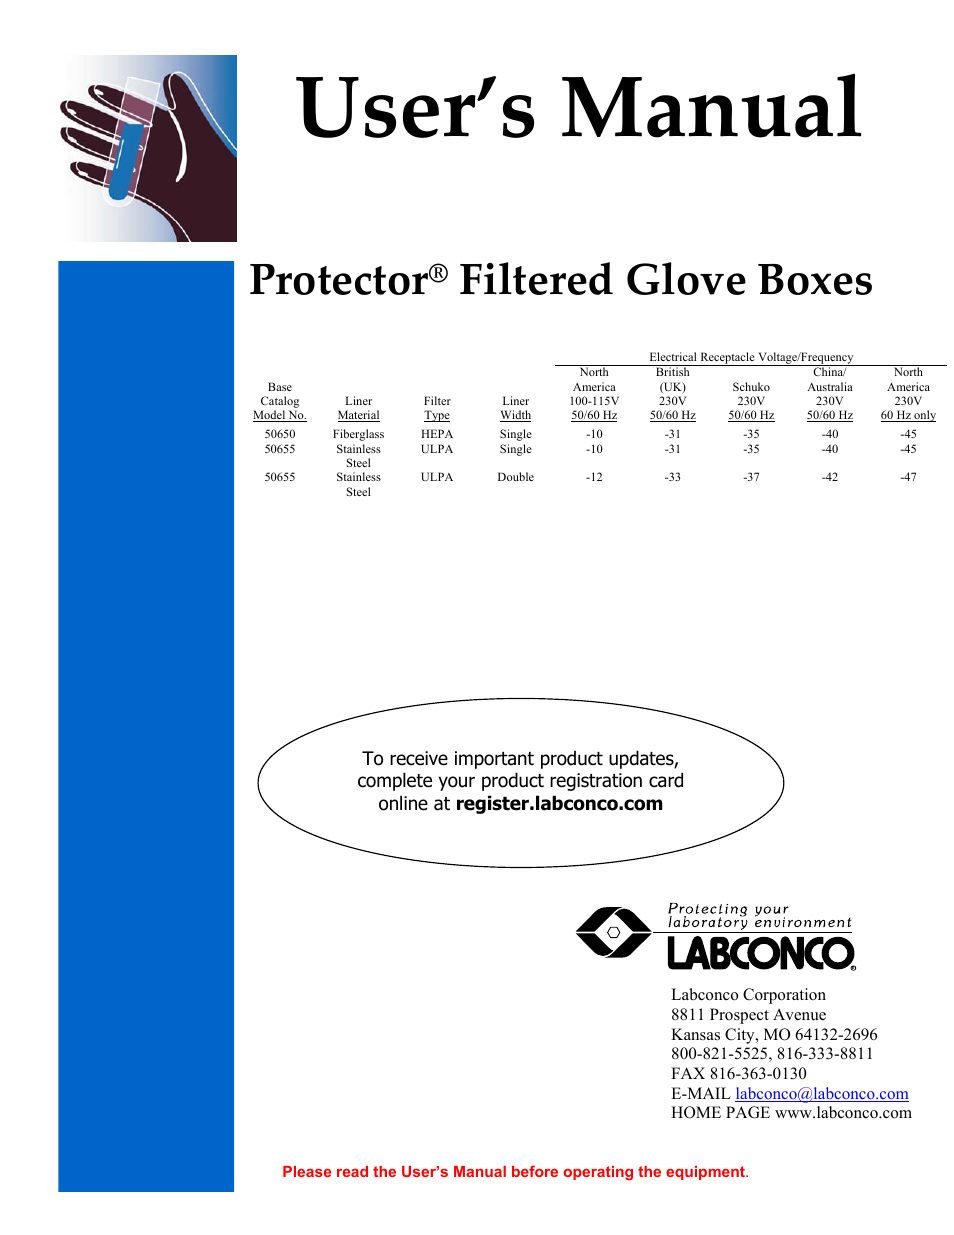 Protector Filtered Glove Box